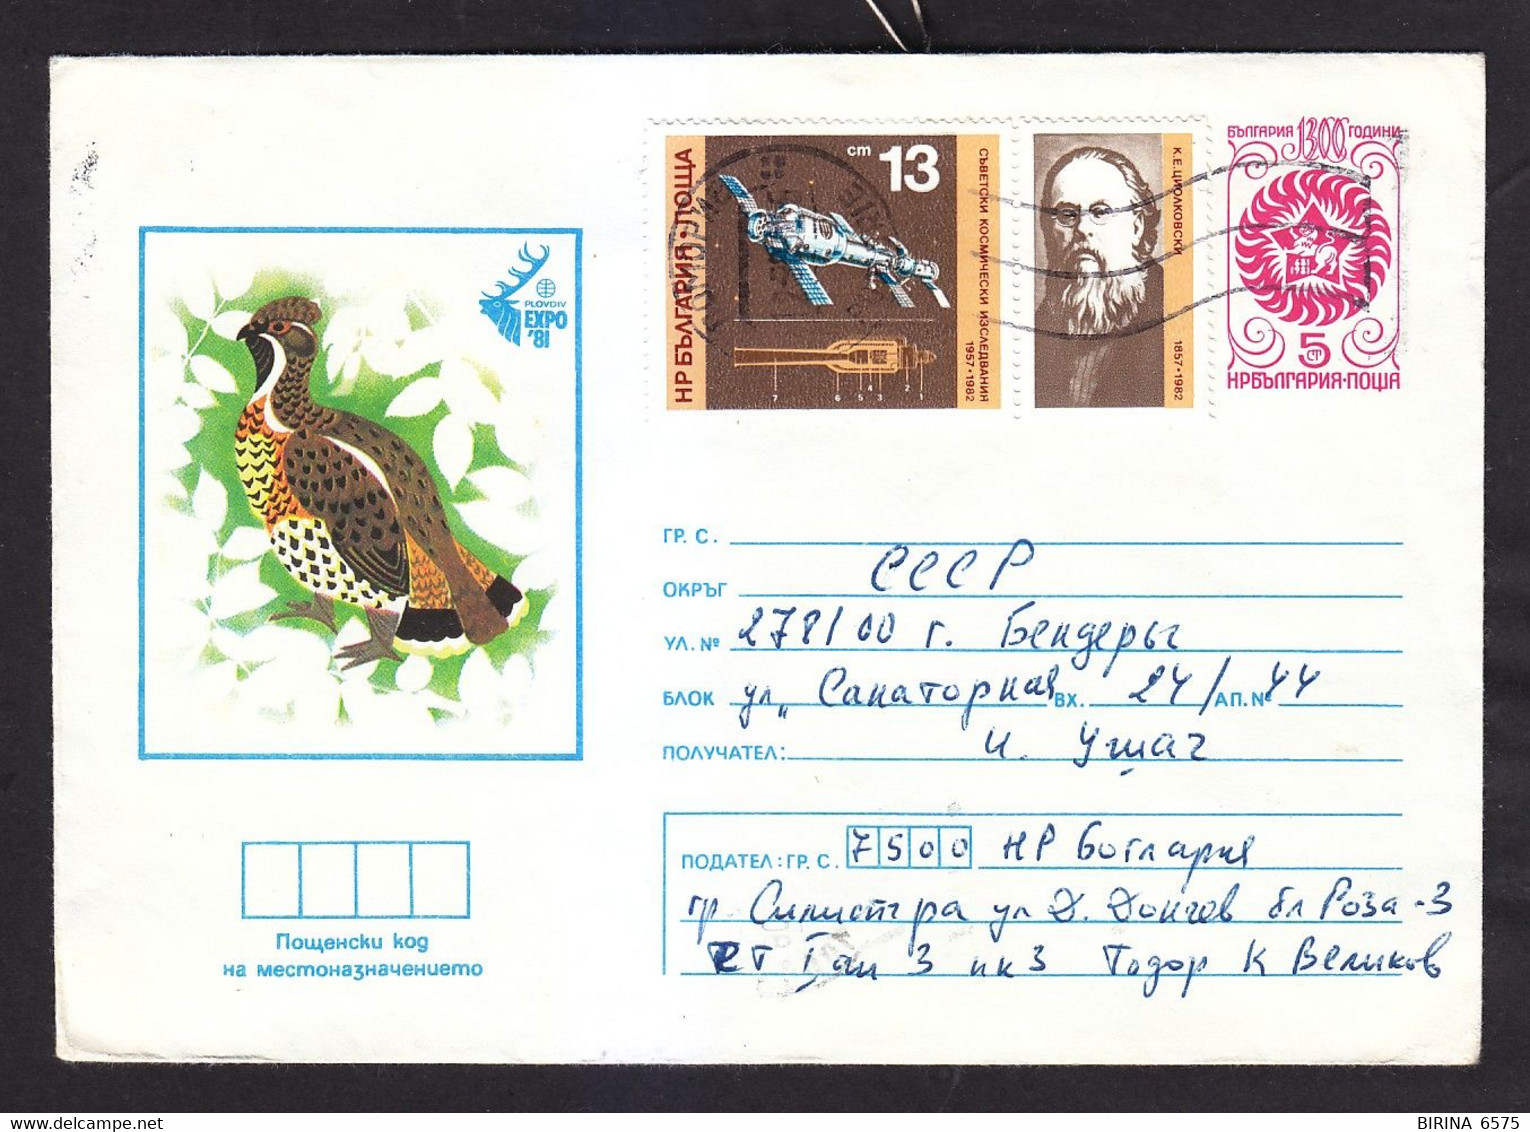 ENVELOPE. BULGARIA. MAIL. 1983 - 5-25 - Covers & Documents